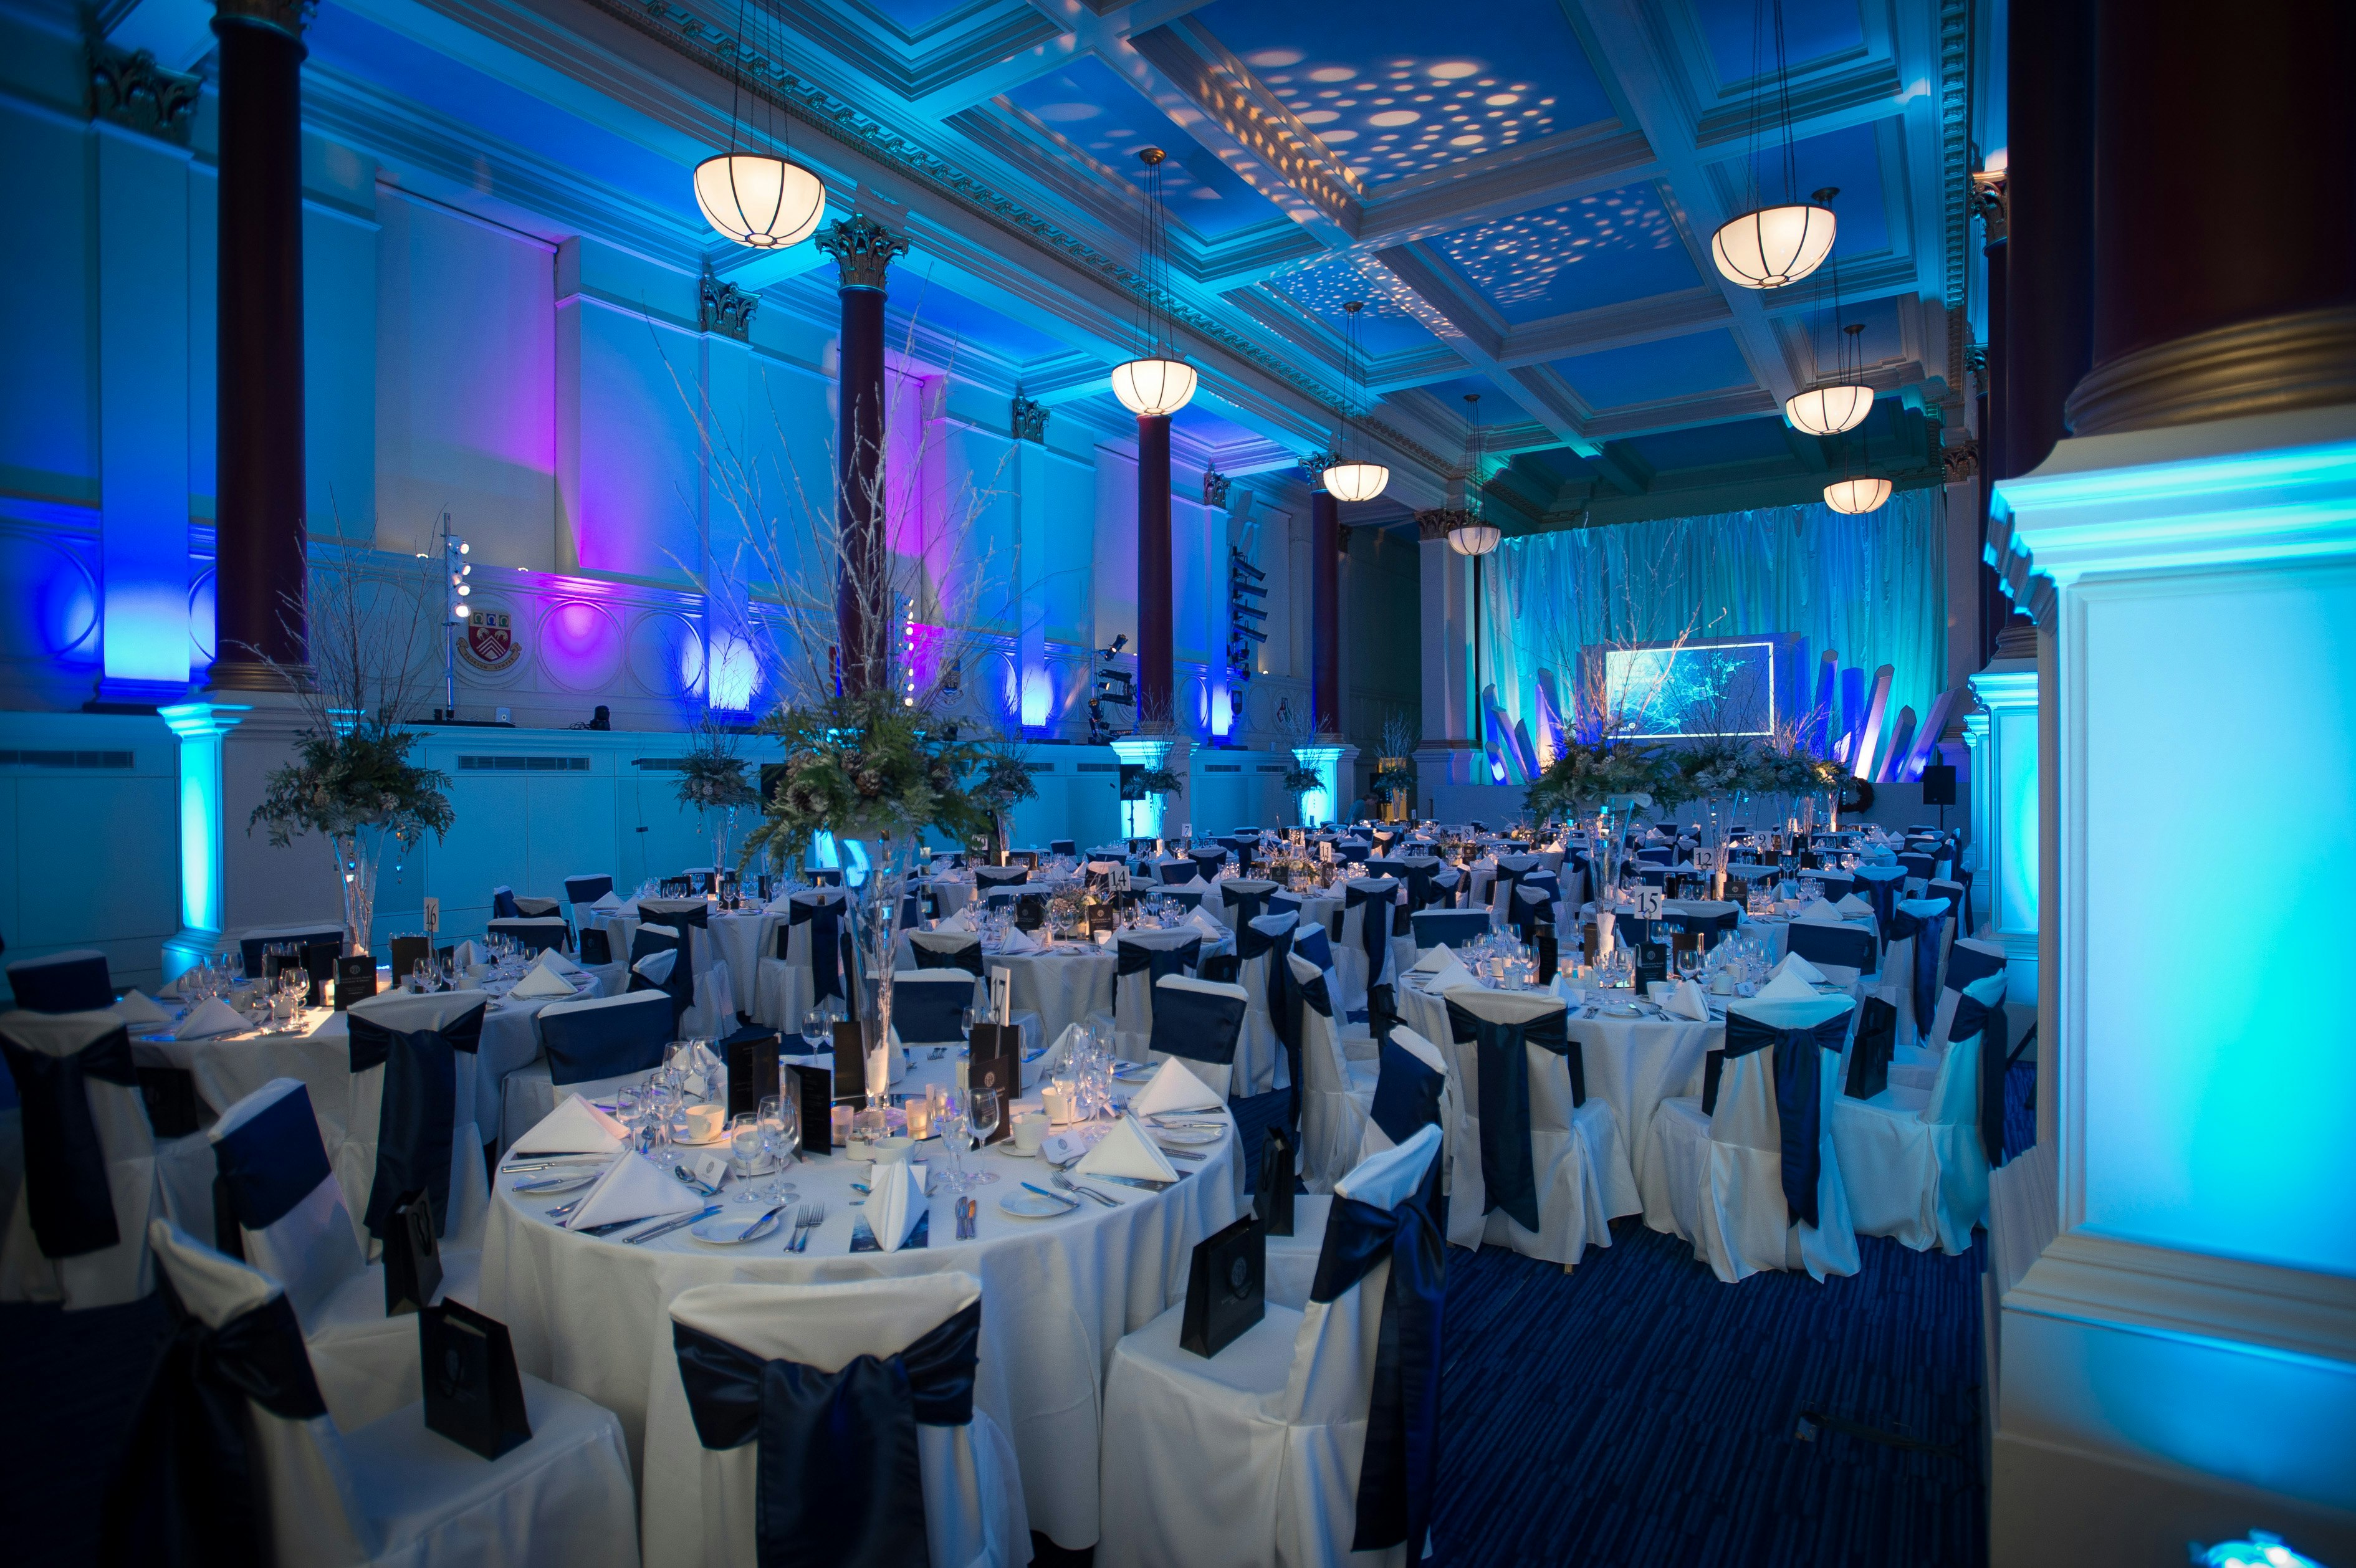 Gala Dinner Venues in London - BMA House